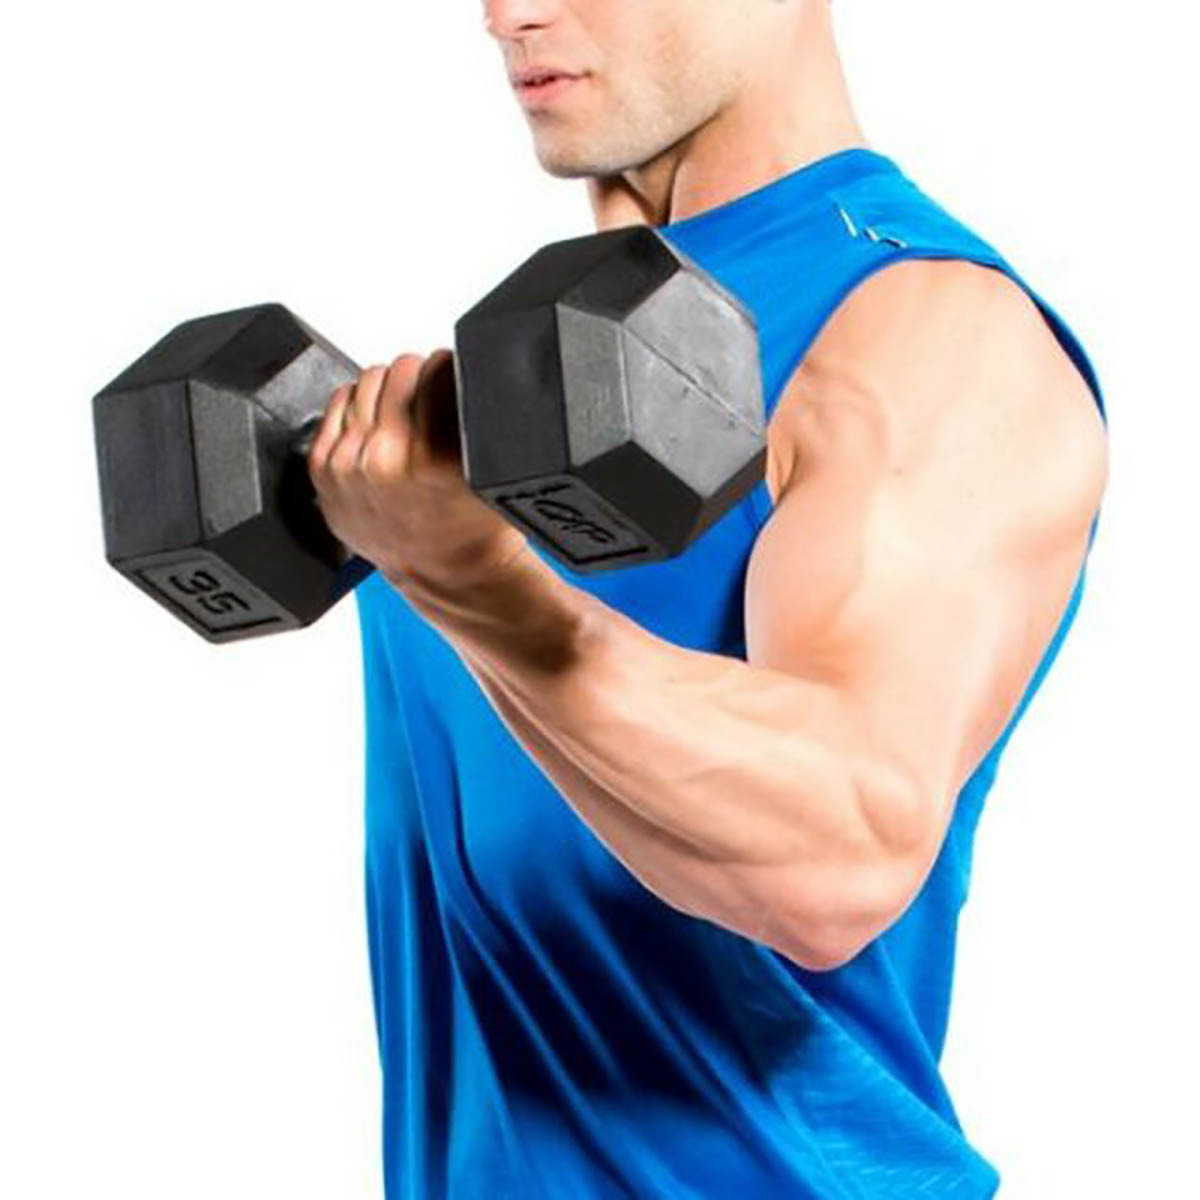 commercial-gym-setup-for-your-arms